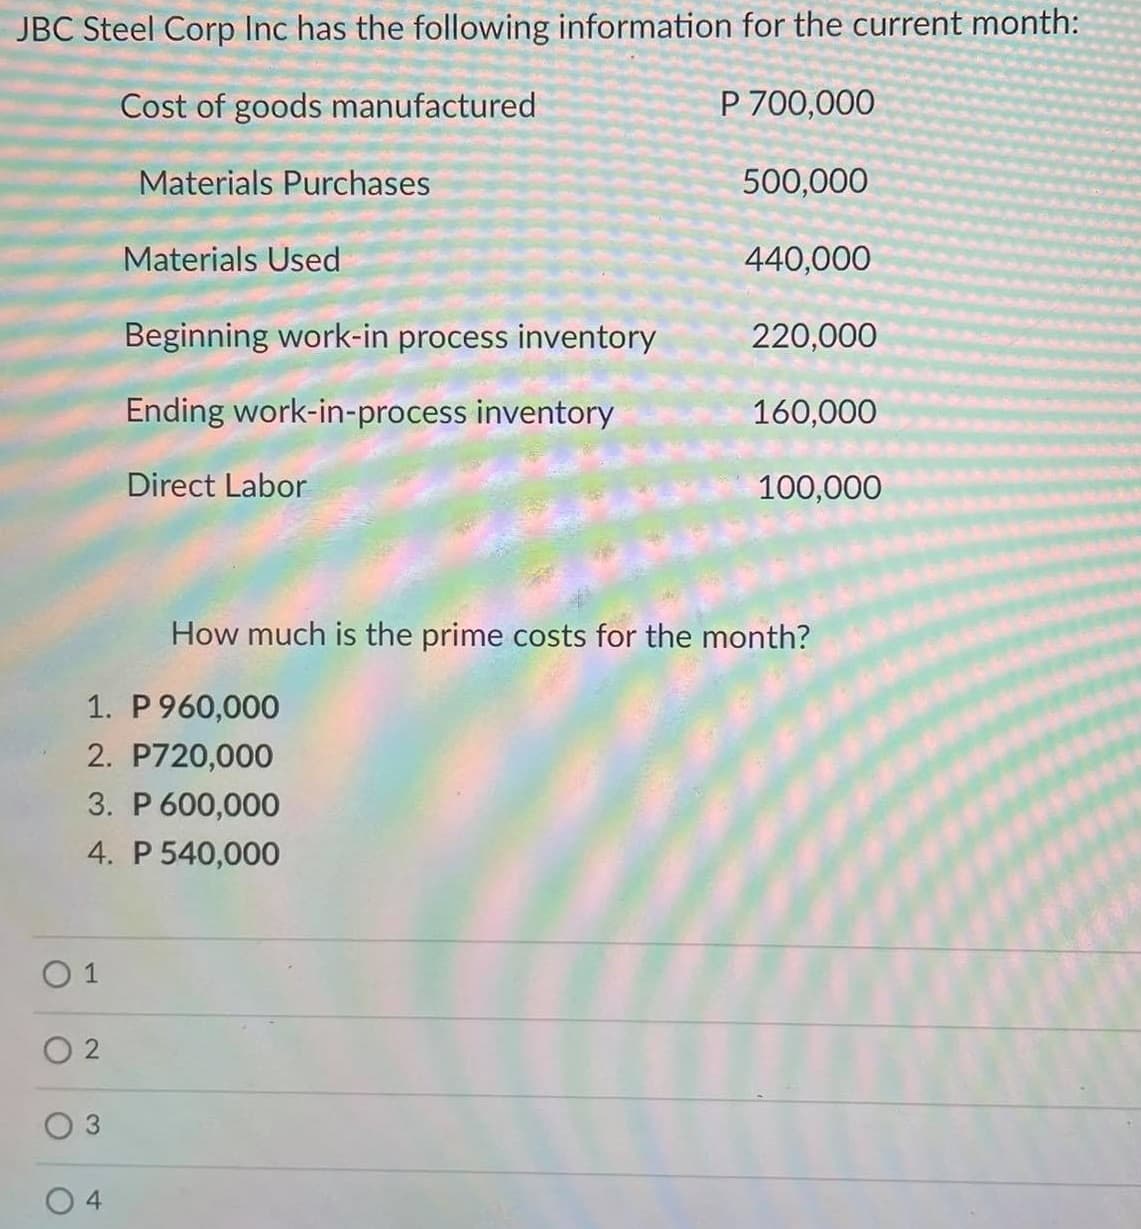 JBC Steel Corp Inc has the following information for the current month:
Cost of goods manufactured
P 700,000
Materials Purchases
500,000
Materials Used
440,000
Beginning work-in process inventory
220,000
Ending work-in-process inventory
160,000
Direct Labor
100,000
How much is the prime costs for the month?
1. P 960,000
2. P720,000
3. P 600,000
4. P 540,000
O 1
3.
4
2.
